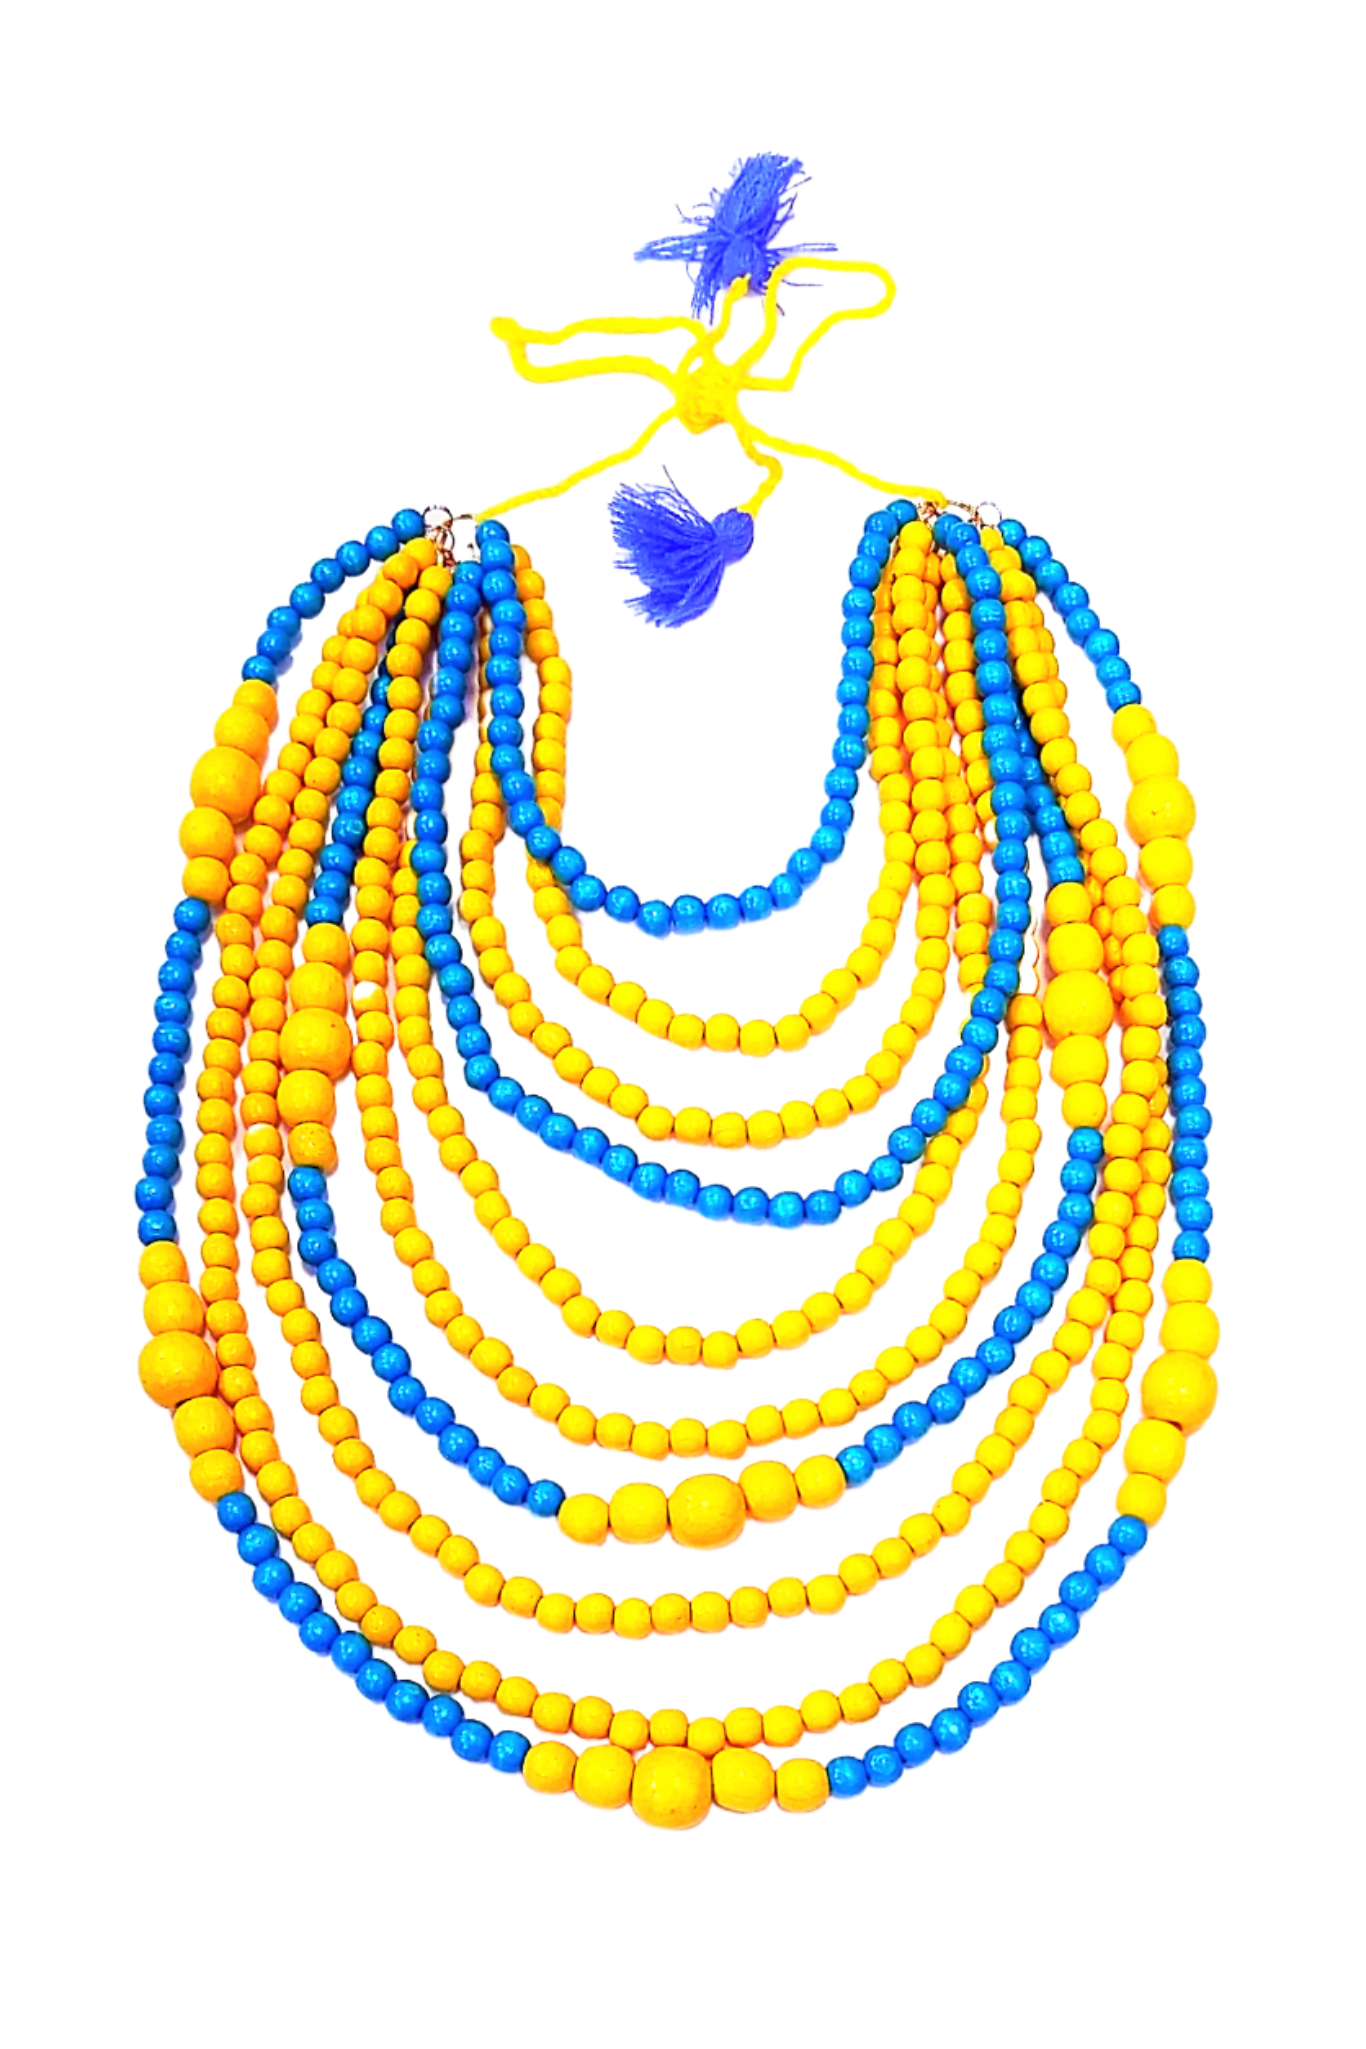 Artisan crafted wooden bead 10-strand necklace. Yellow and blue